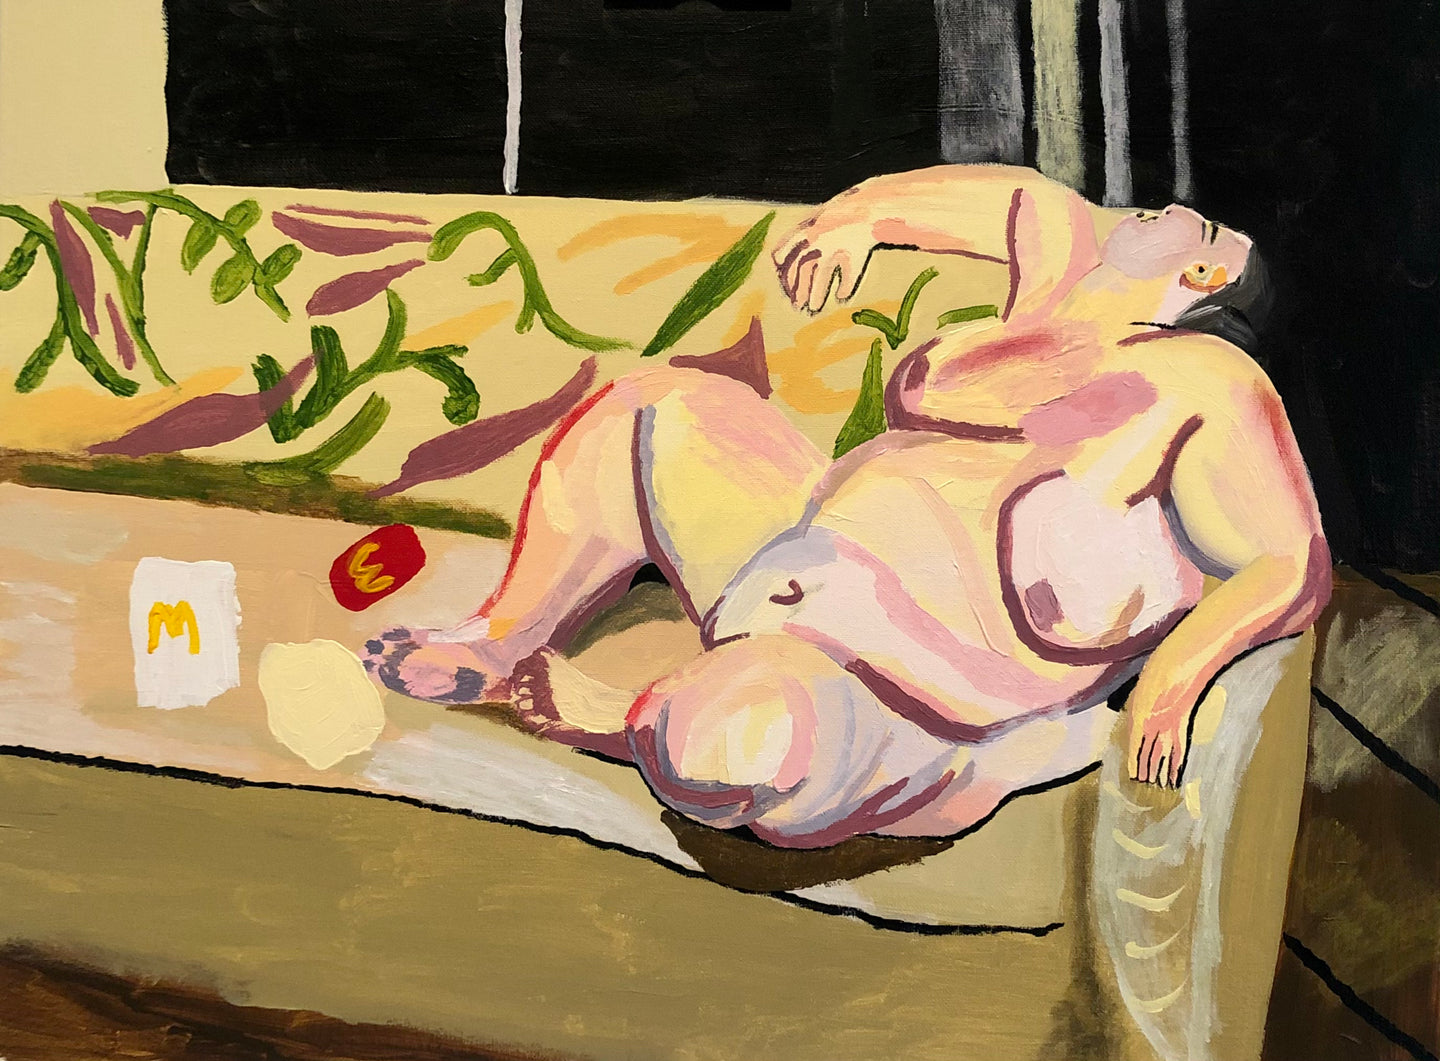 Fat Figure Tired After Eating Too Much McDonald’s (Inspired by Lucian Freud’s “Benefits Supervisor Resting”)